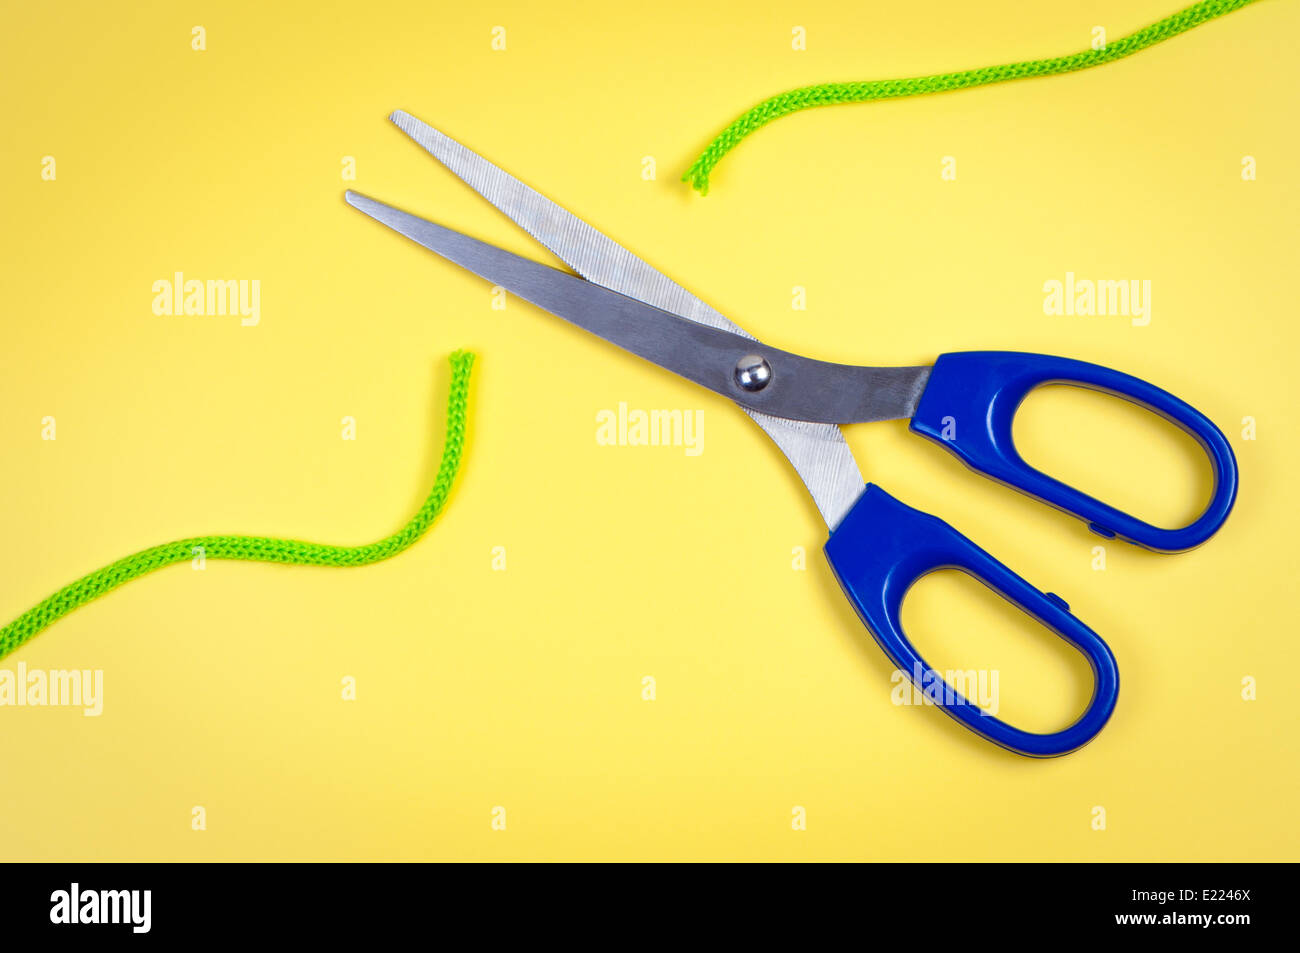 Scissors cut rope on a yellow background. Stock Photo